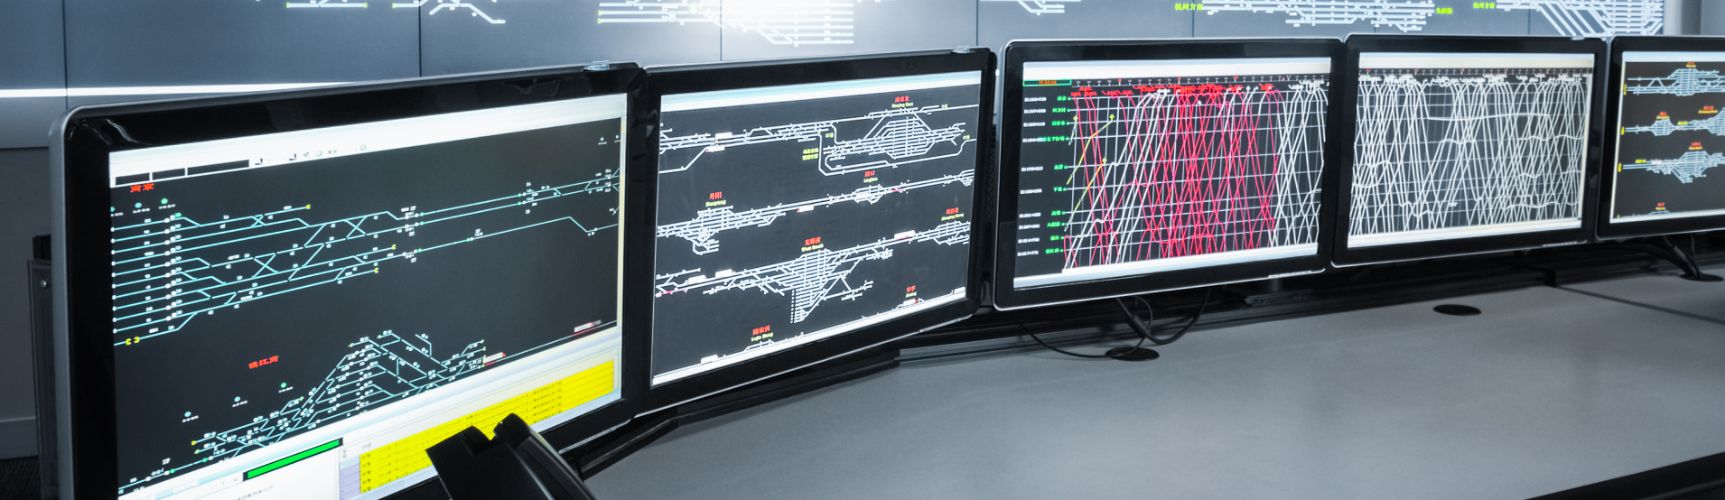 State of the Art Signaling and Monitoring Solutions for Safer and Efficient Rail